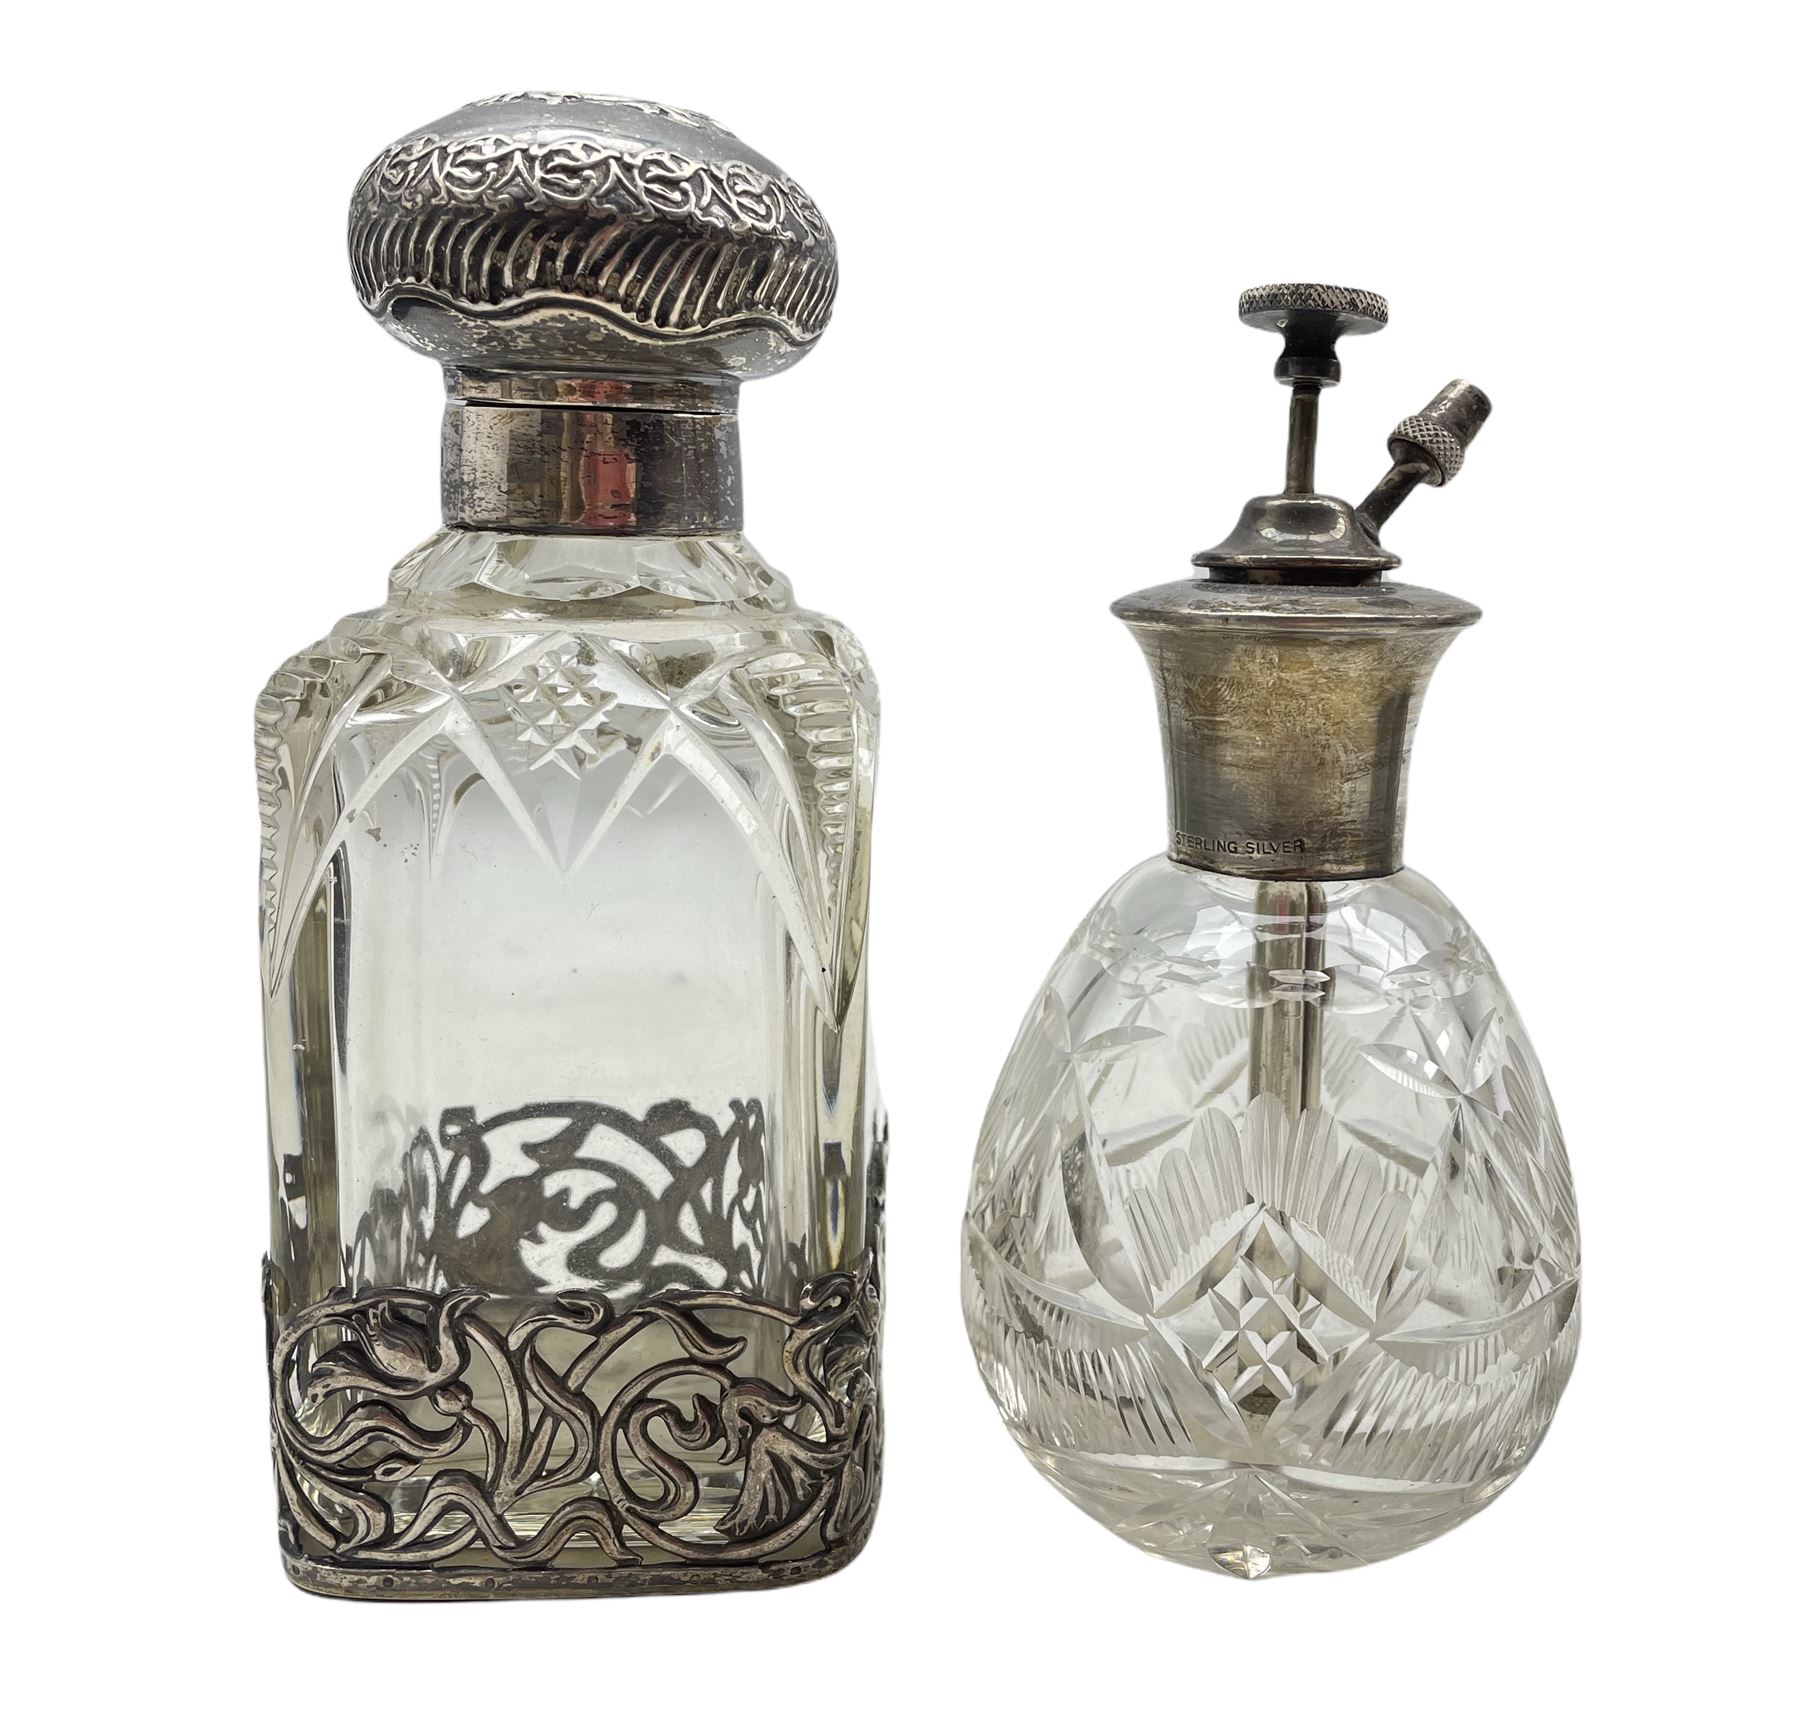 Edwardian silver and cut glass scent bottle with embossed cover and Art Nouveau style pierced silver